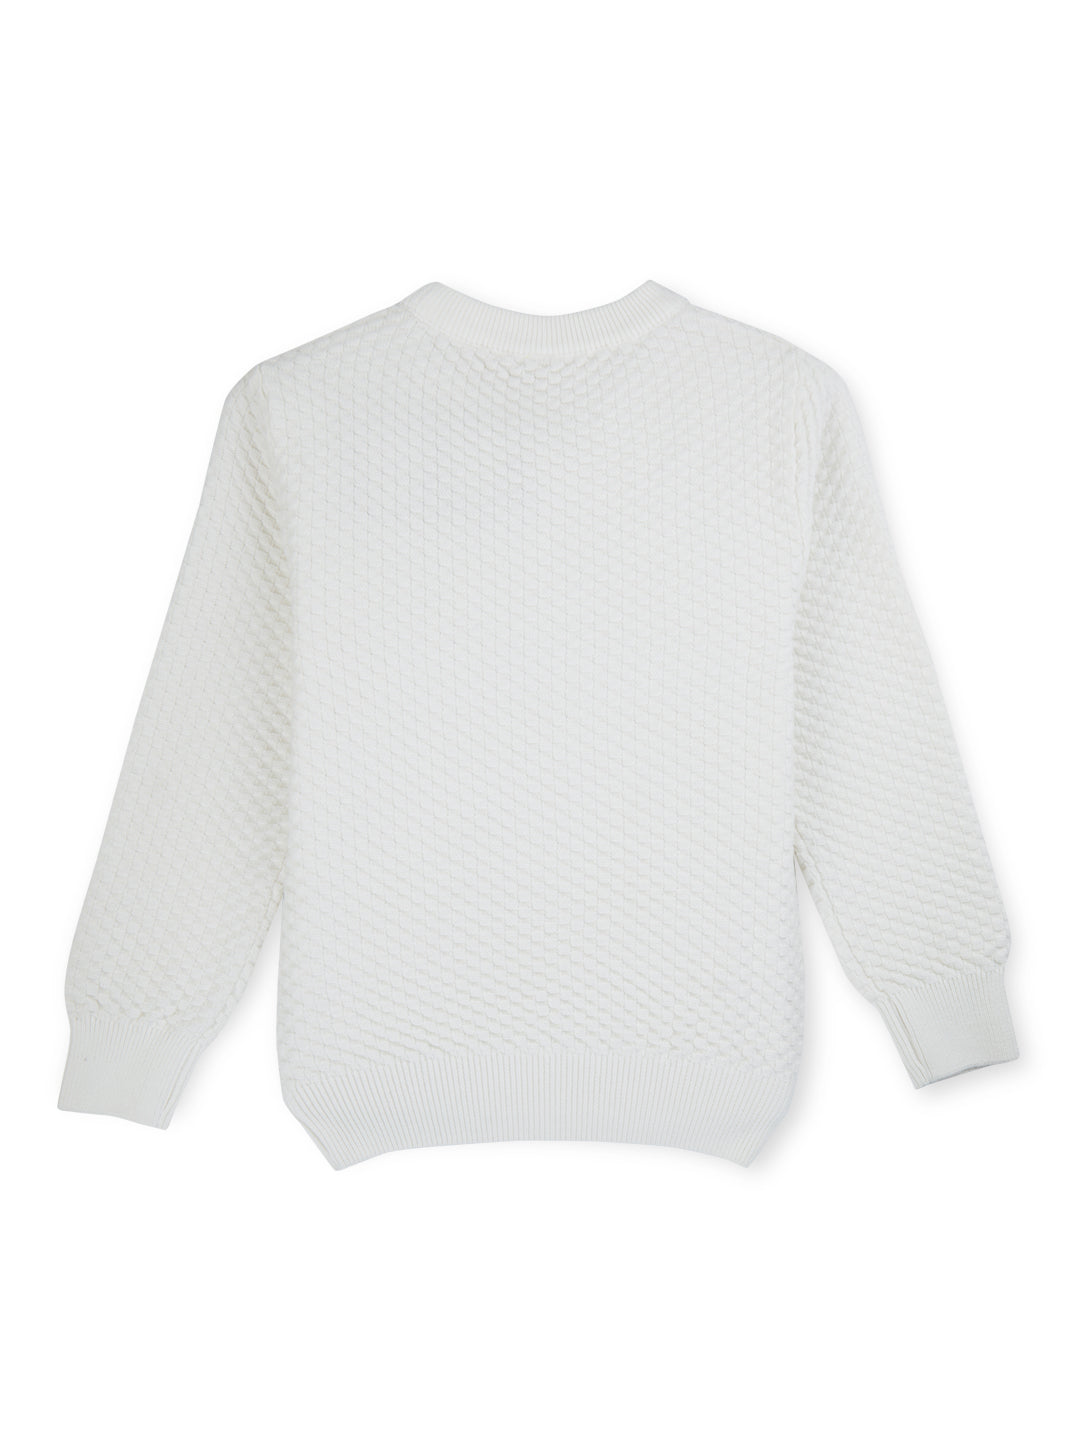 Boys White Solid Cotton Full Sleeves Sweater